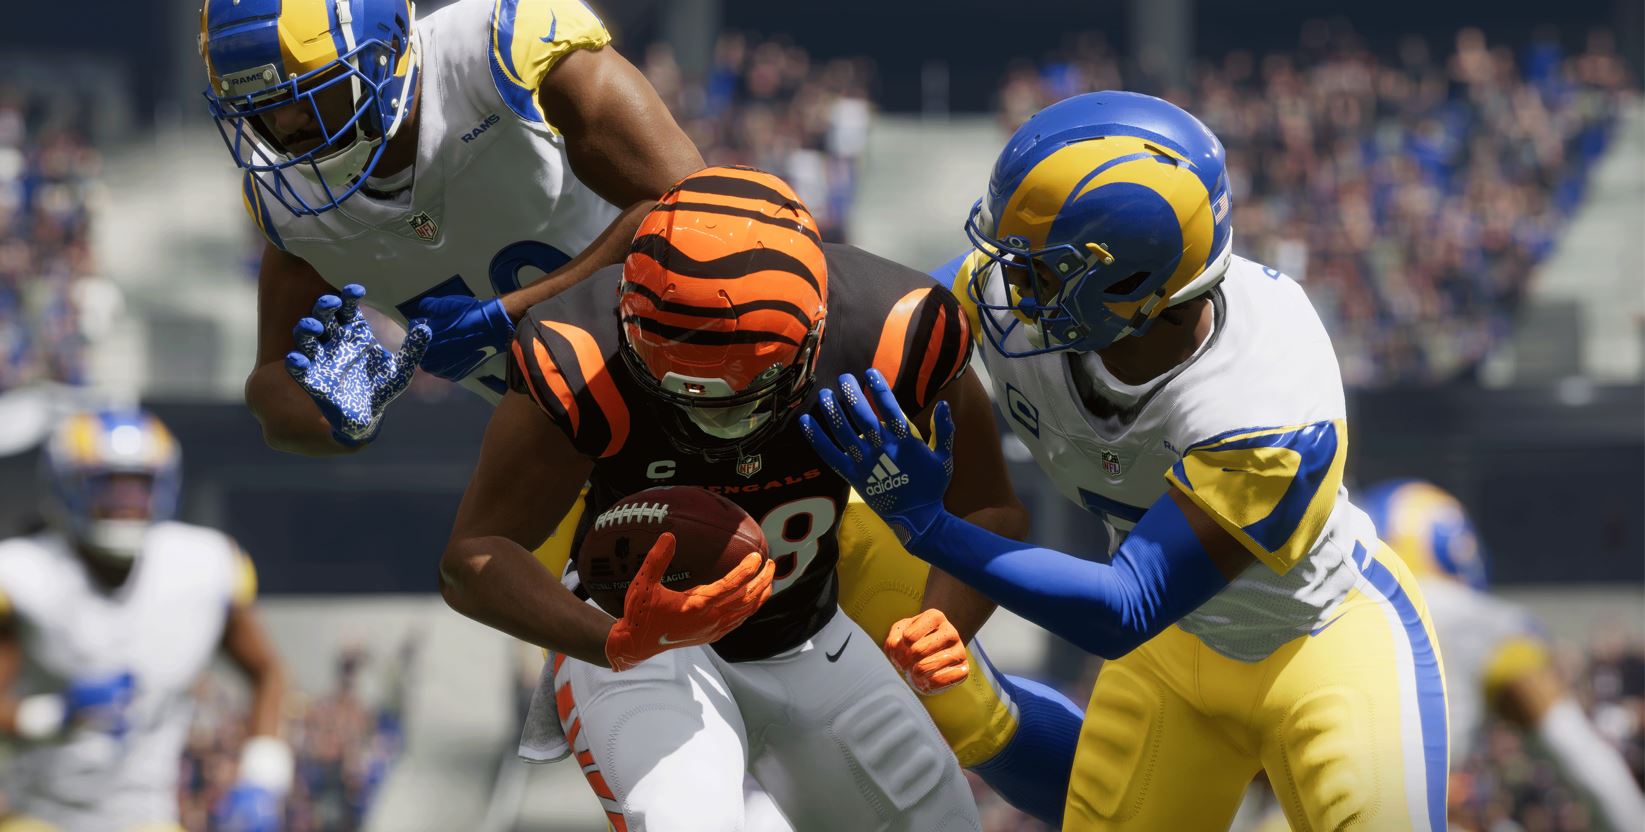 Joe Burrow gets tackled by Chargers players in Madden NFL 23.